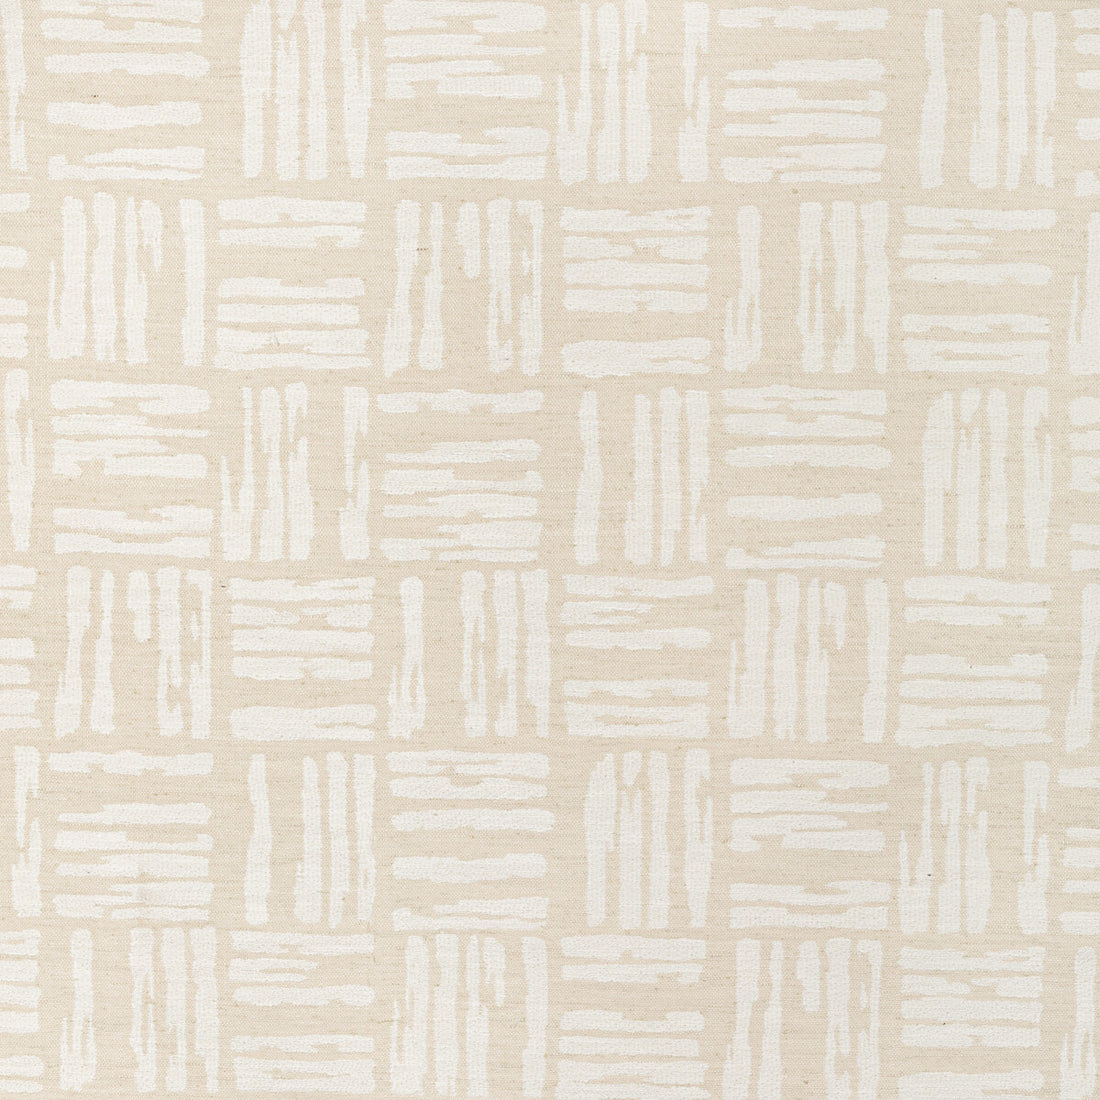 Sand Ladder fabric in linen color - pattern 36384.16.0 - by Kravet Design in the Jeffrey Alan Marks Seascapes collection